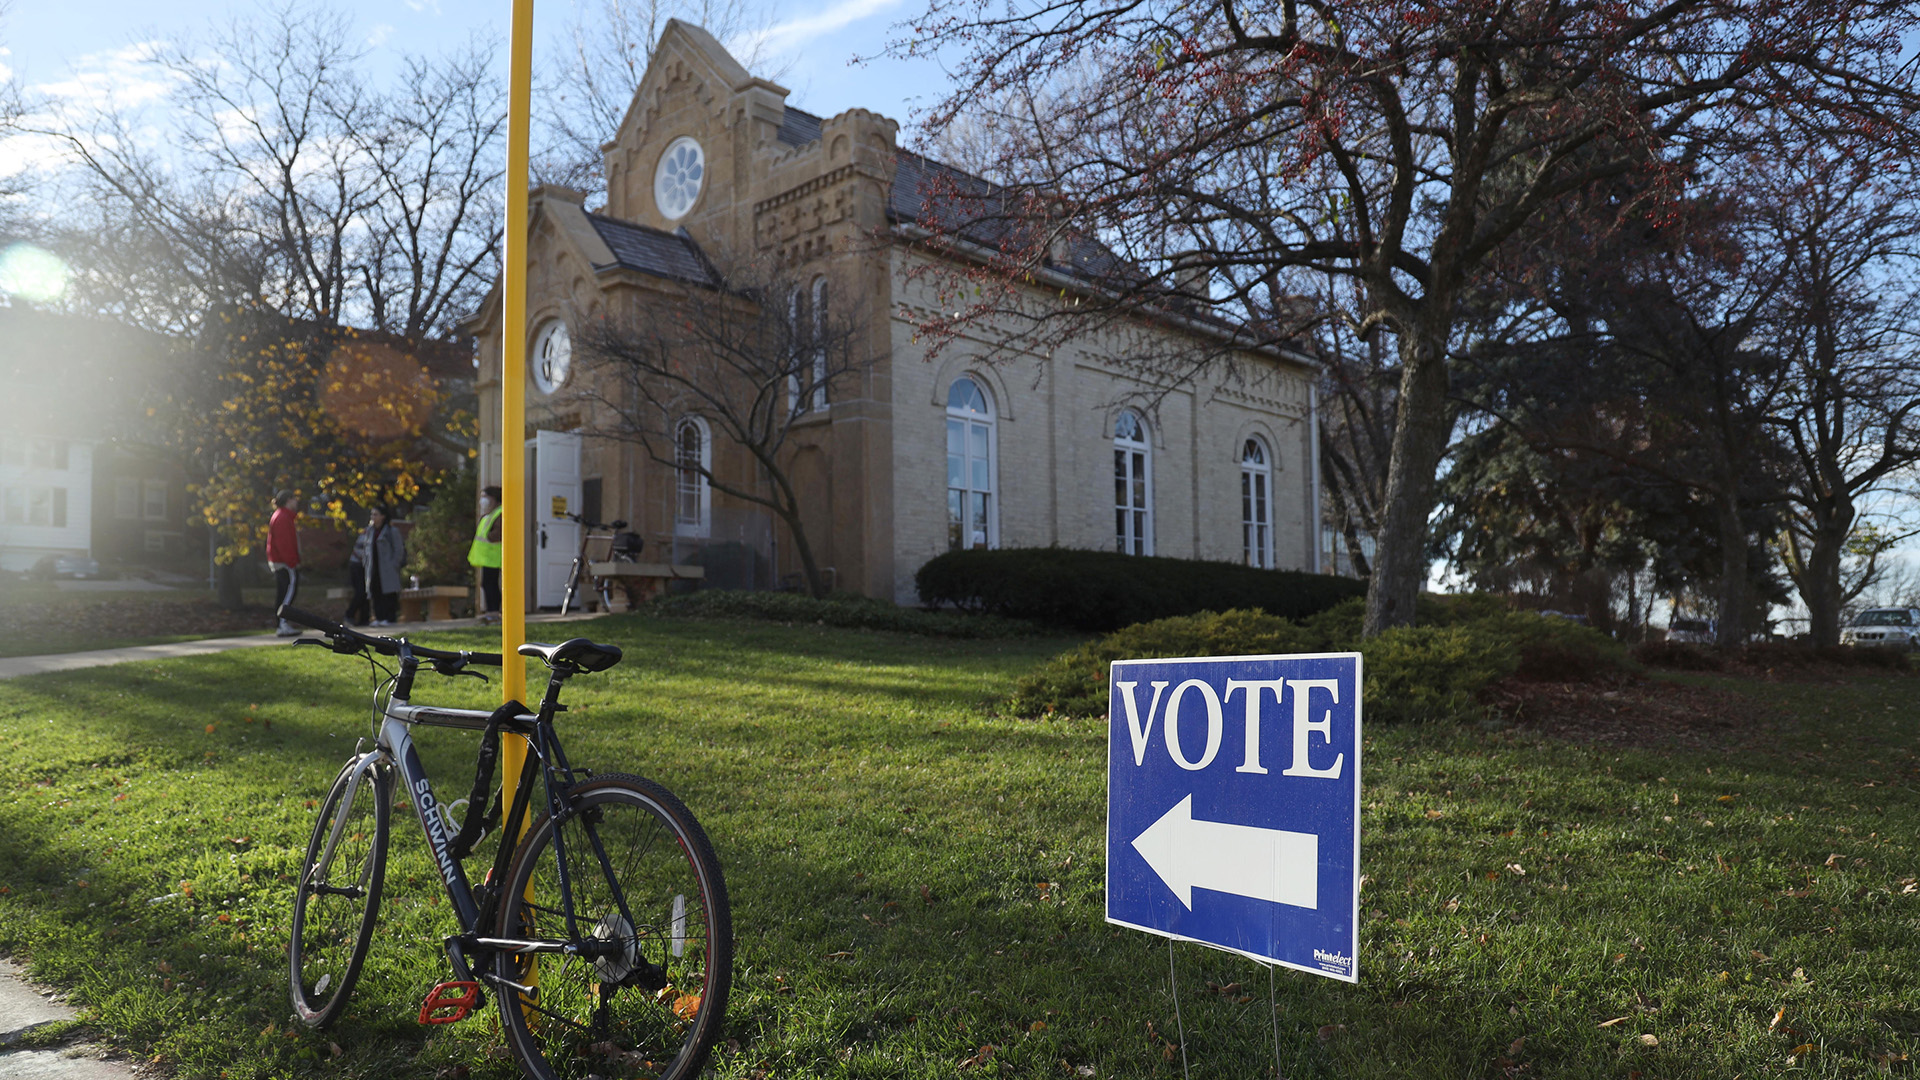 A cardboard sign with an arrow and the word "Vote" is mounted with metal poles on a lawn next to a bicycle locked to a street sign pole, in front of a stone masonry building with arched and rose windows with people standing outside its front entrance, with trees and buildings in the background under a party cloudy sky.